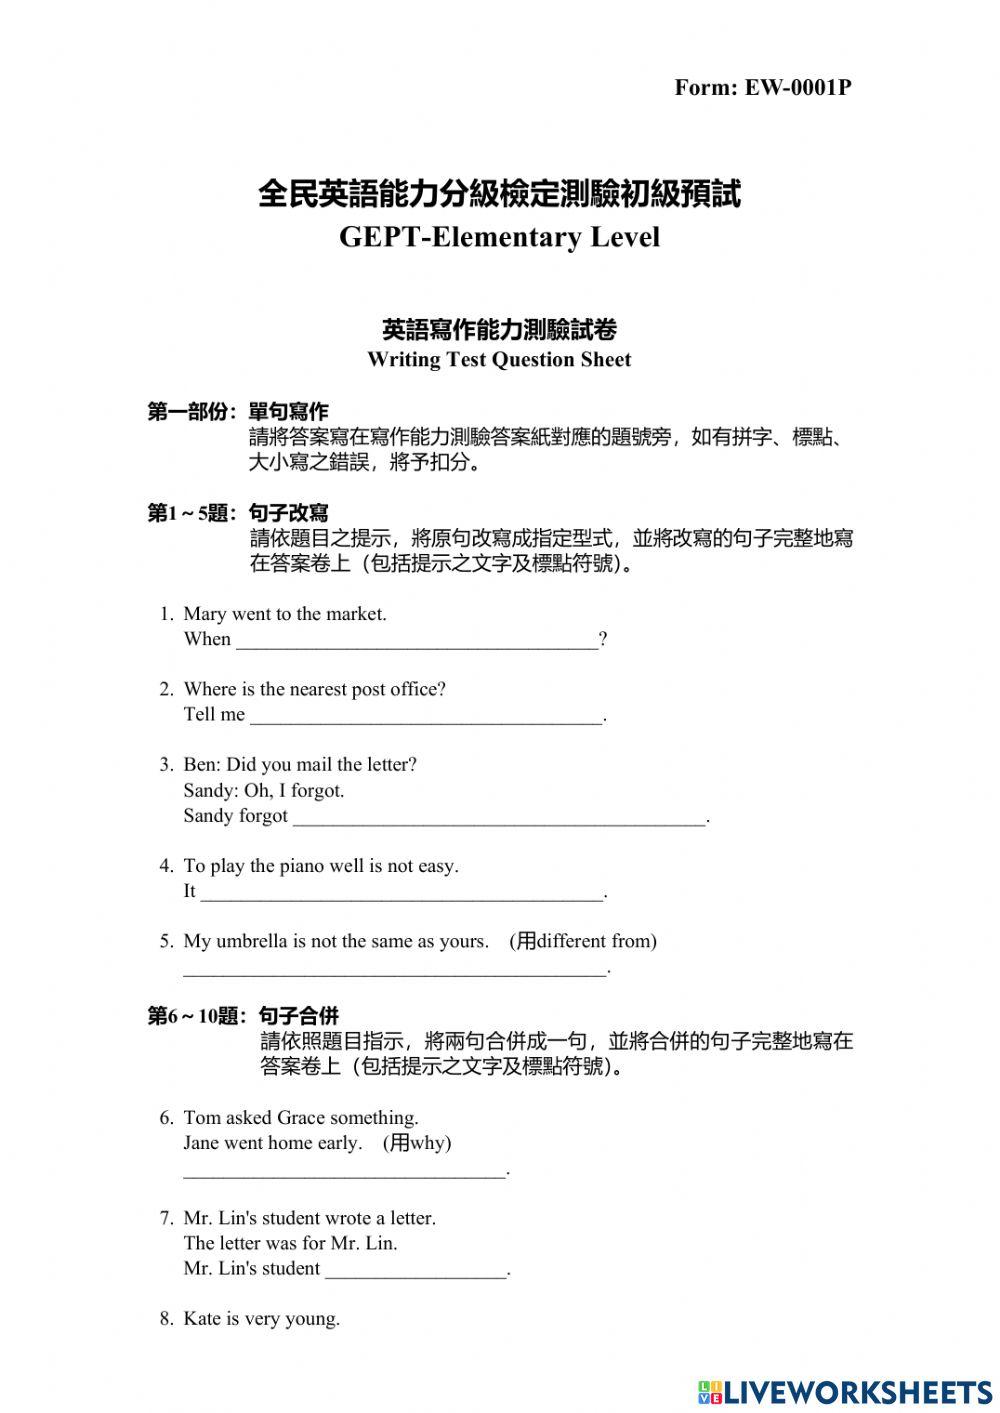 GEPT Elementary Level Test 1